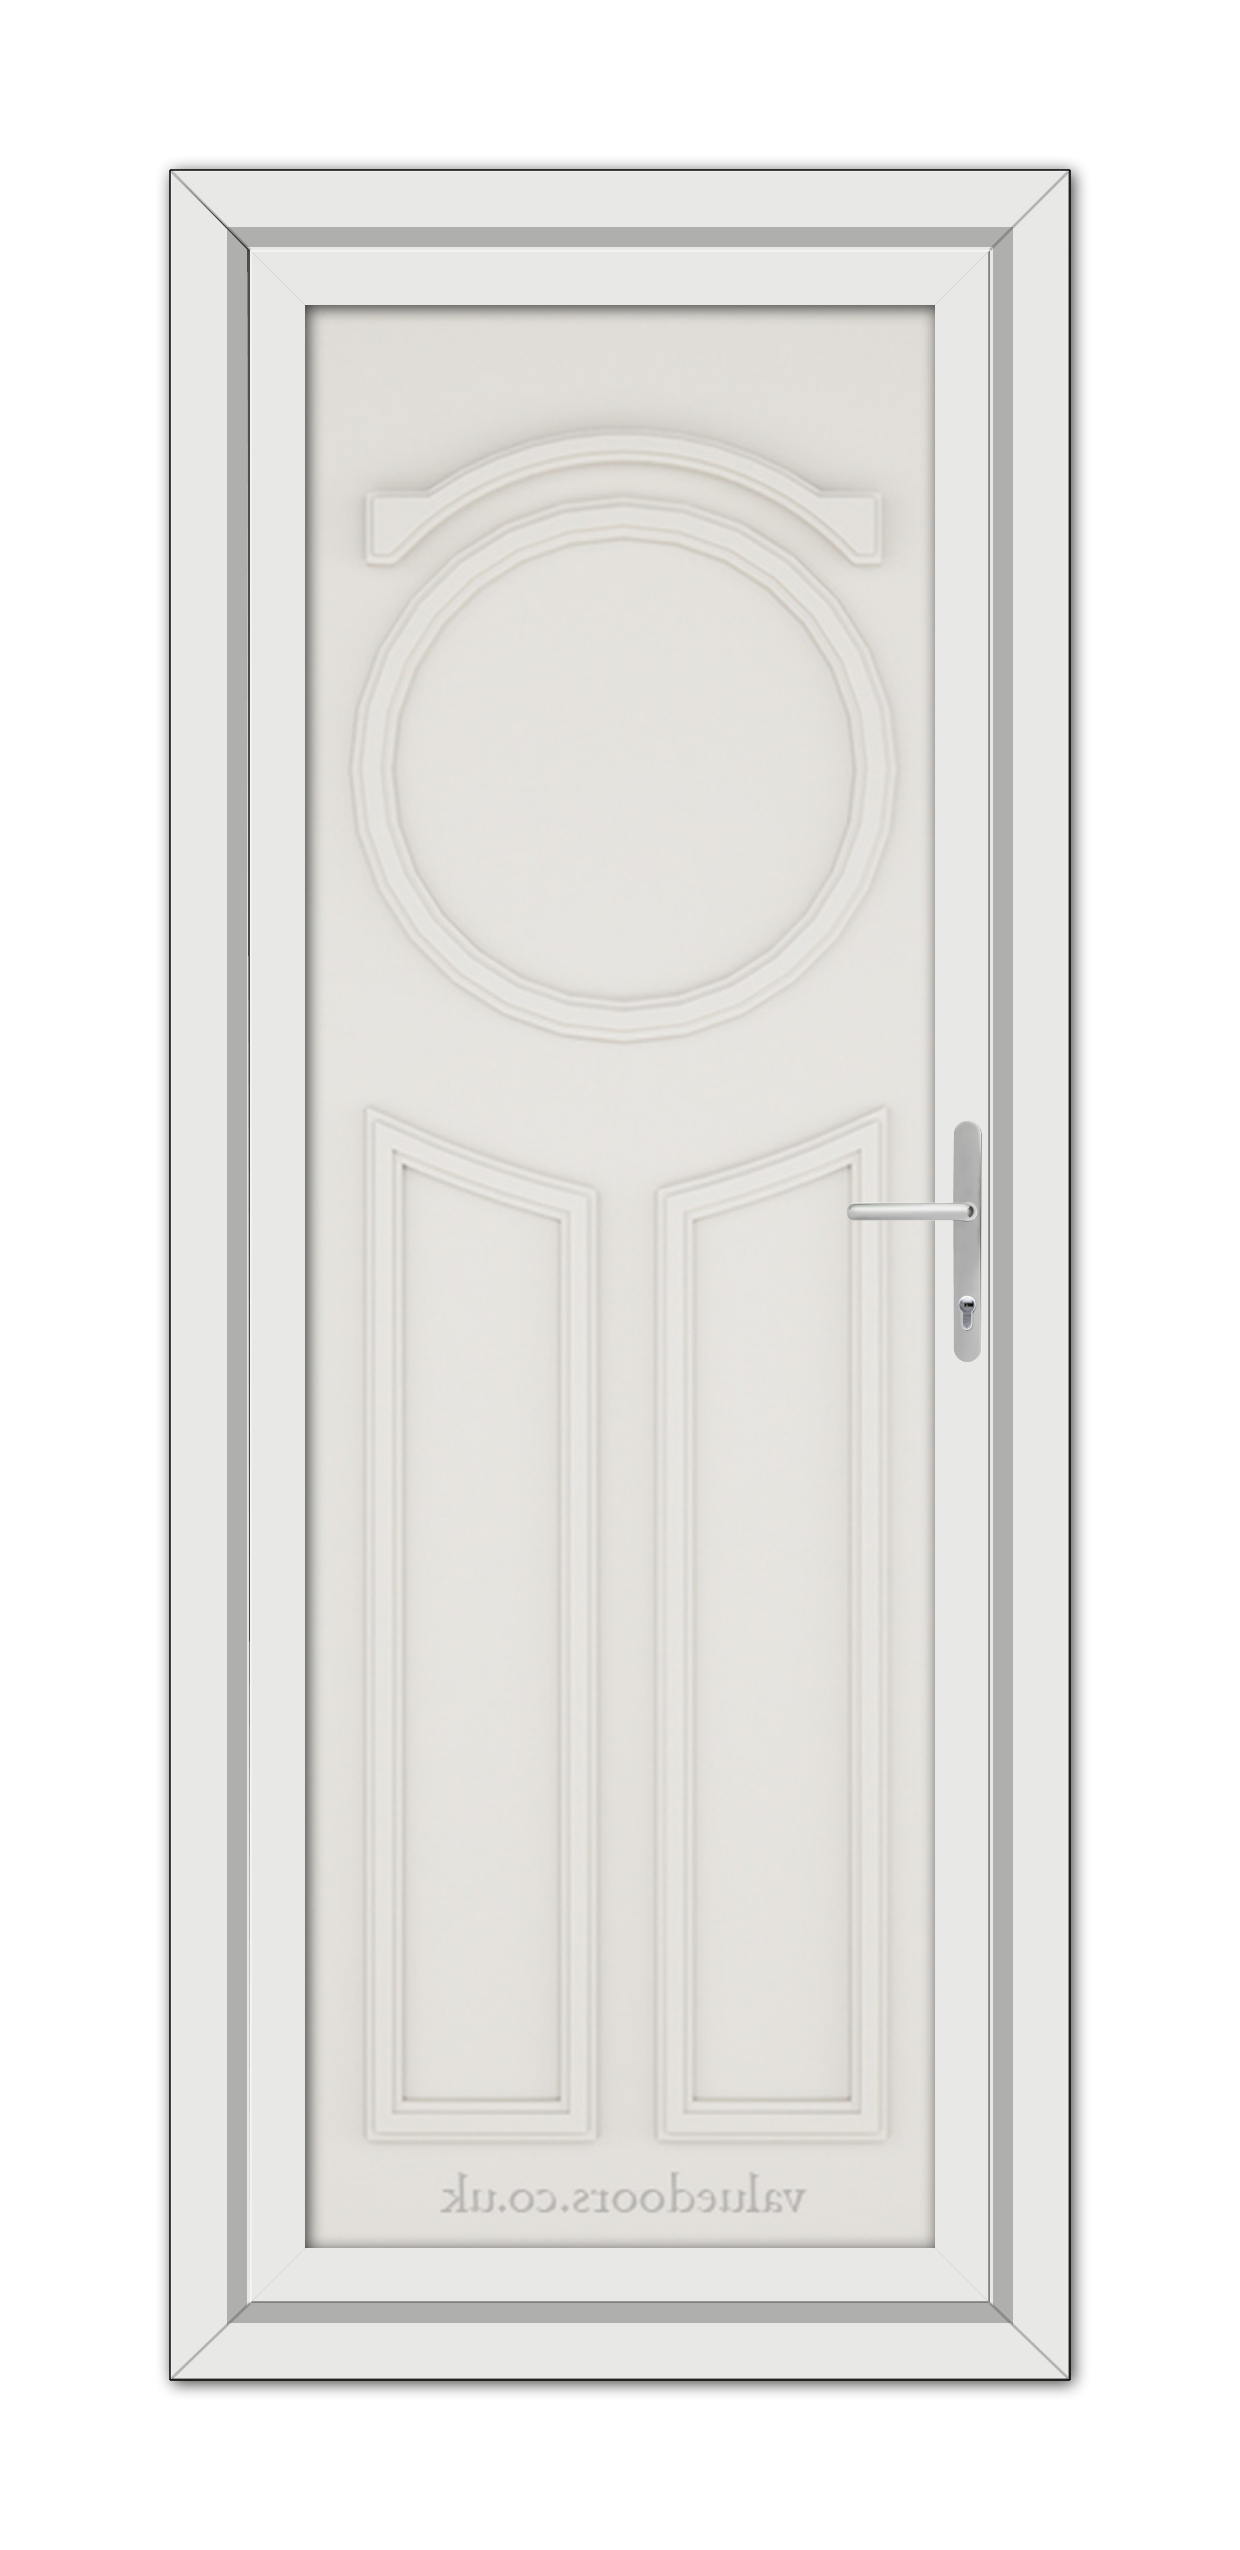 A White Cream Blenheim Solid uPVC Door featuring a circular window at the top, with a standard handle on the right side, within a plain frame.